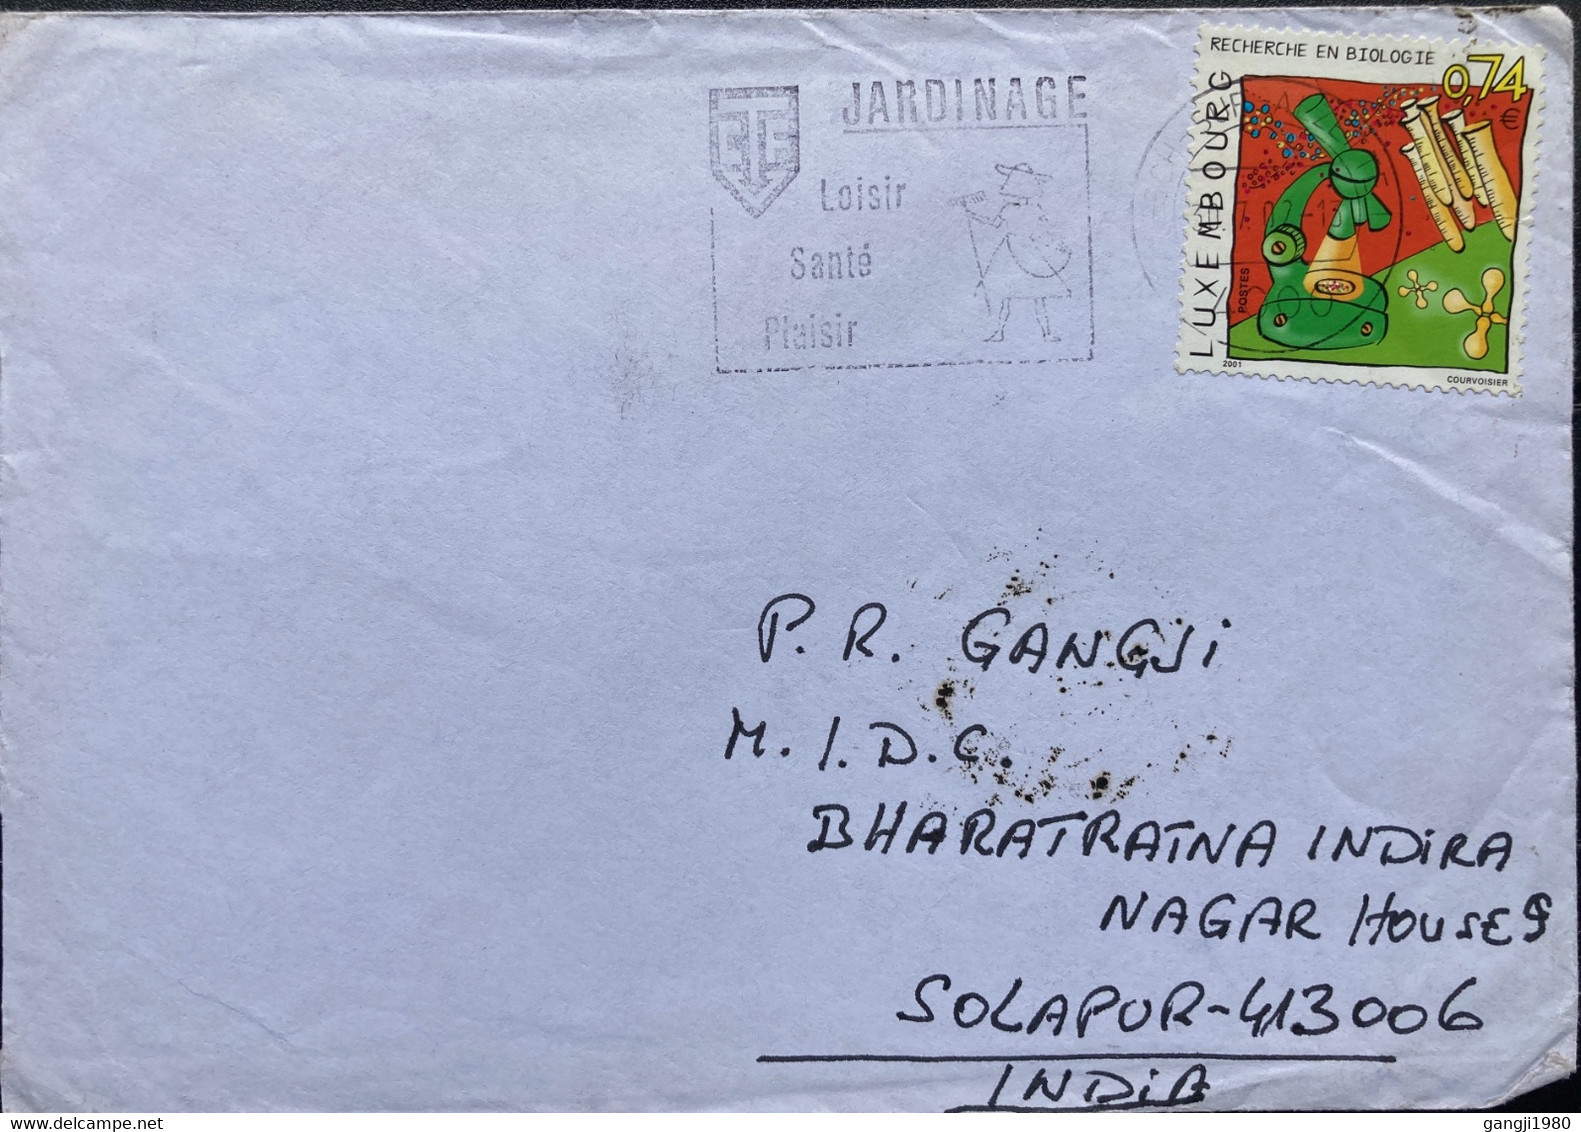 LUXEMBOURG 2002, REASERCH ,MICROSCOPE, LABROTARY ,JARDINAGE LOISIR SANTE PLAISIR ,GARDENING FOR HEALTH, COVER TO INDIA - Covers & Documents